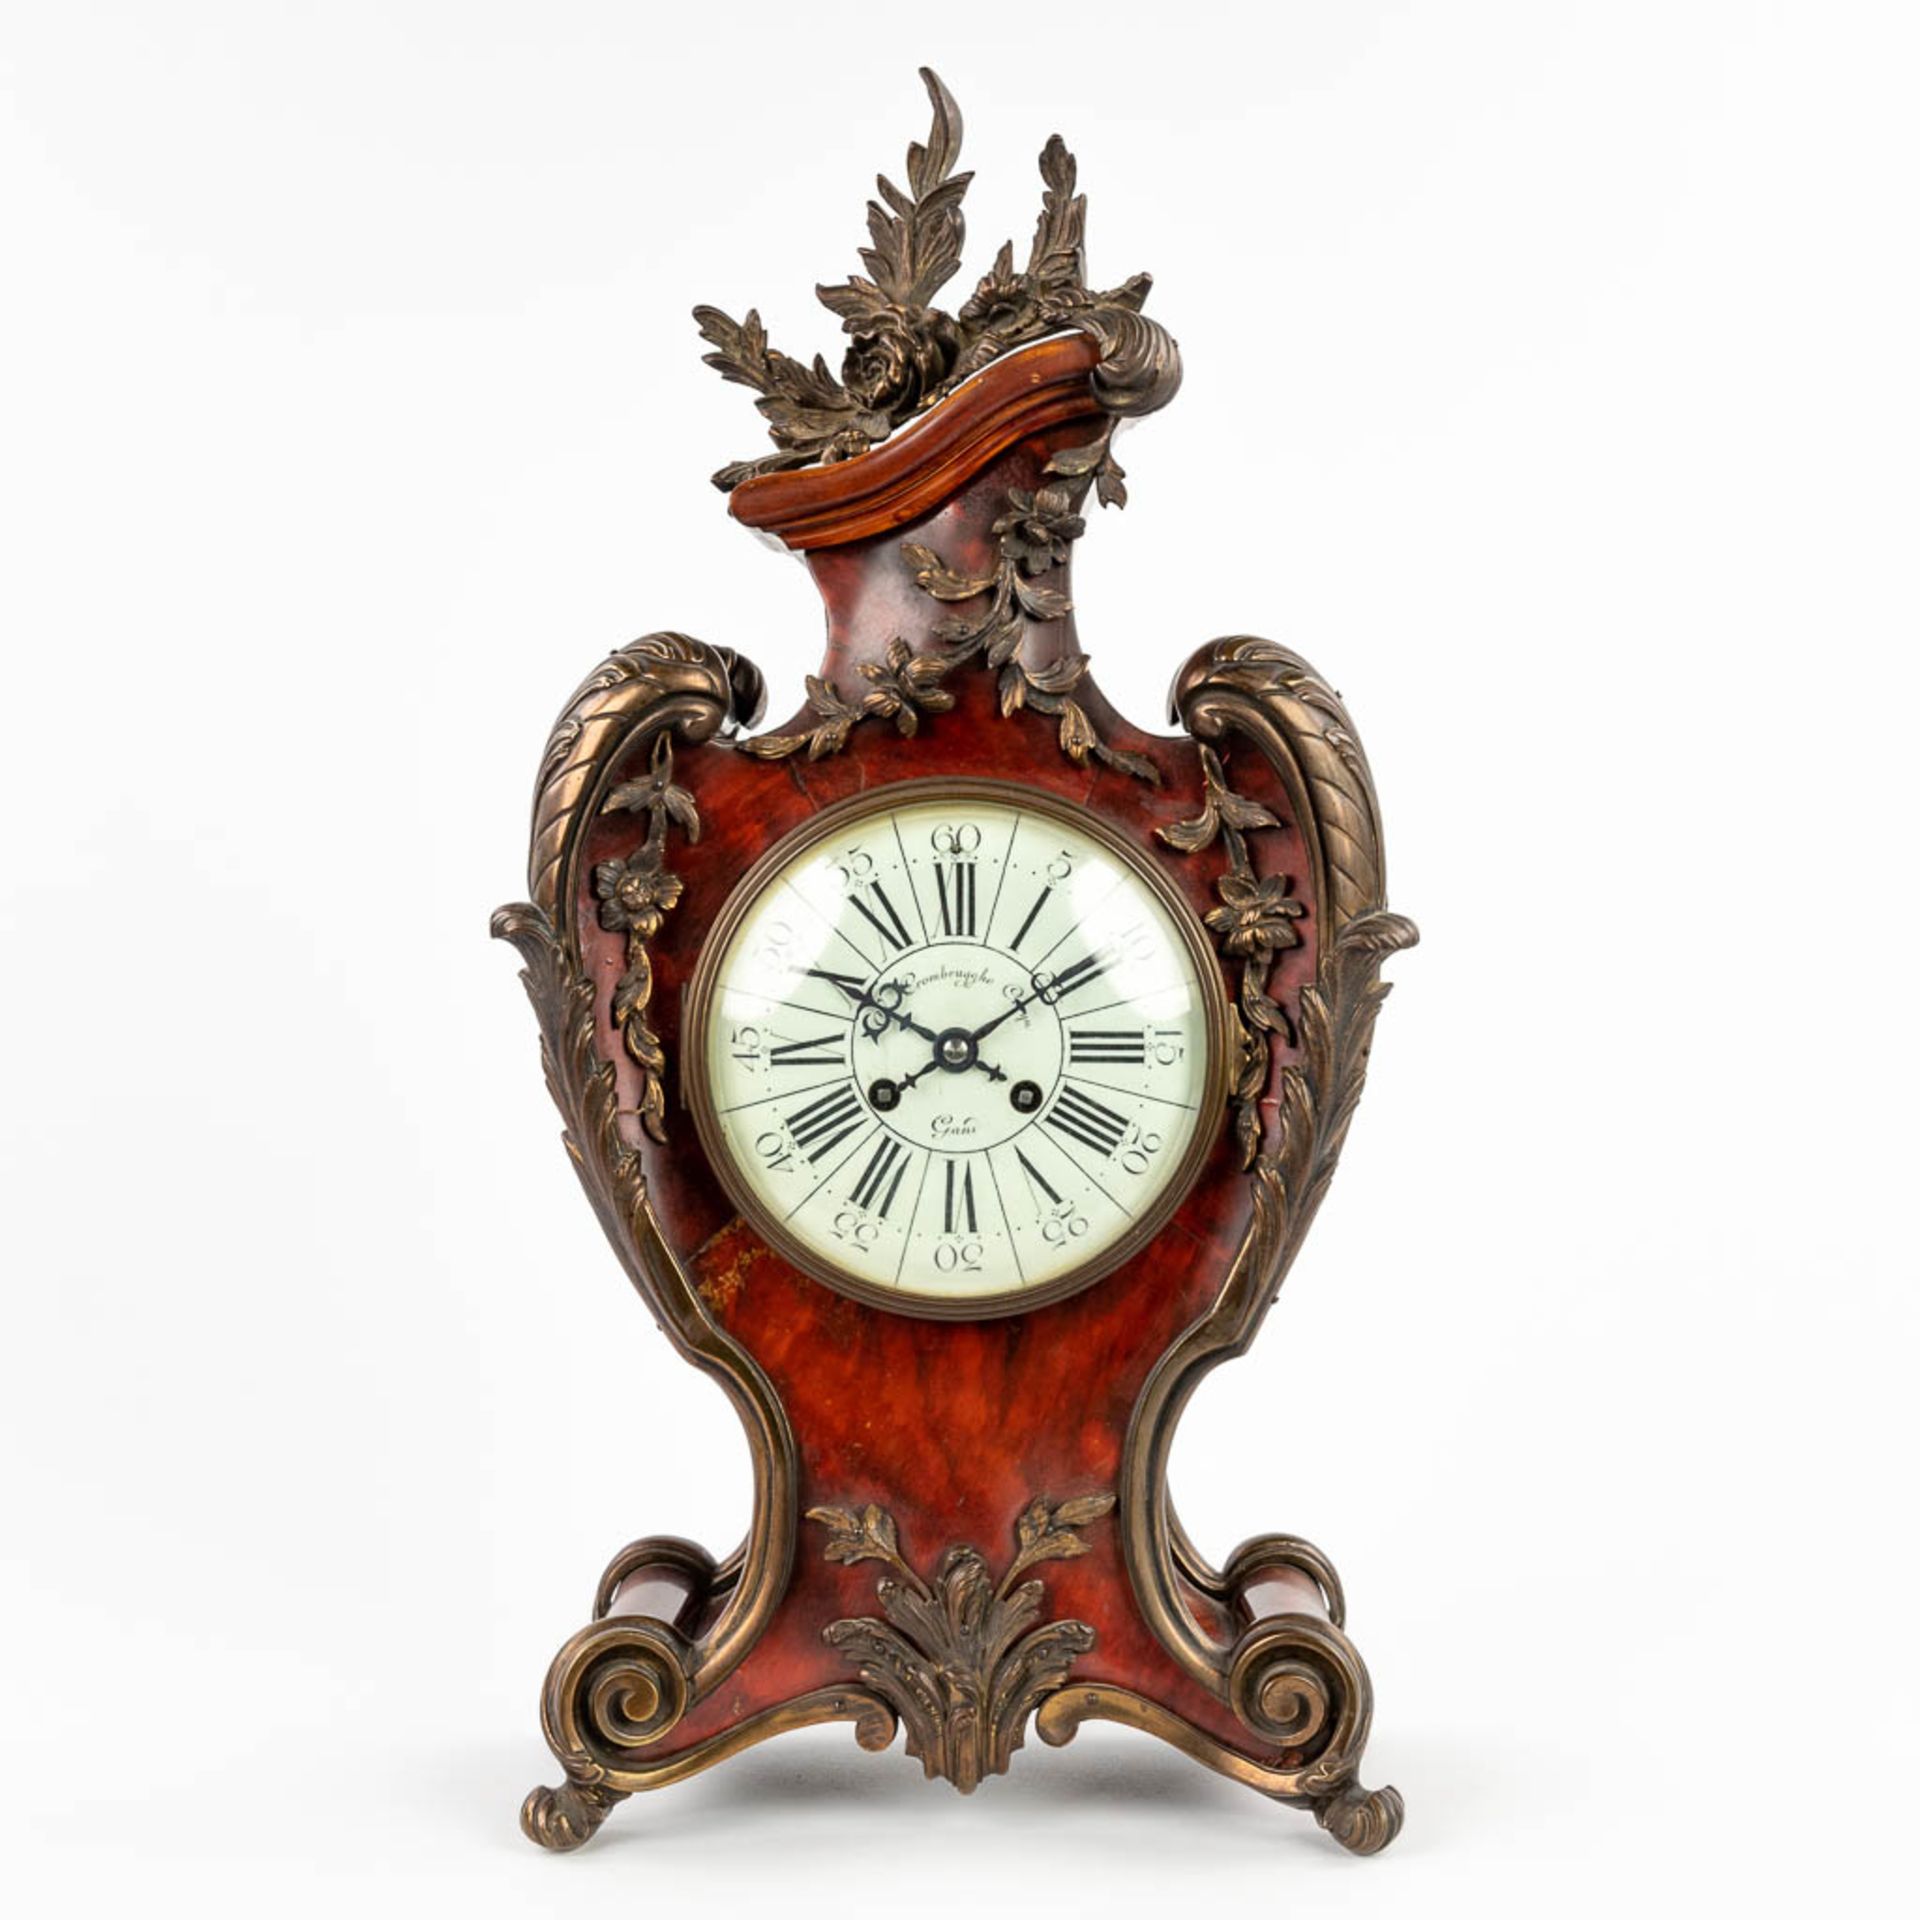 A mantle clock, tortoiseshell finished with gilt bronze in Louis XV style. 19th C. (D:14 x W:28 x H: